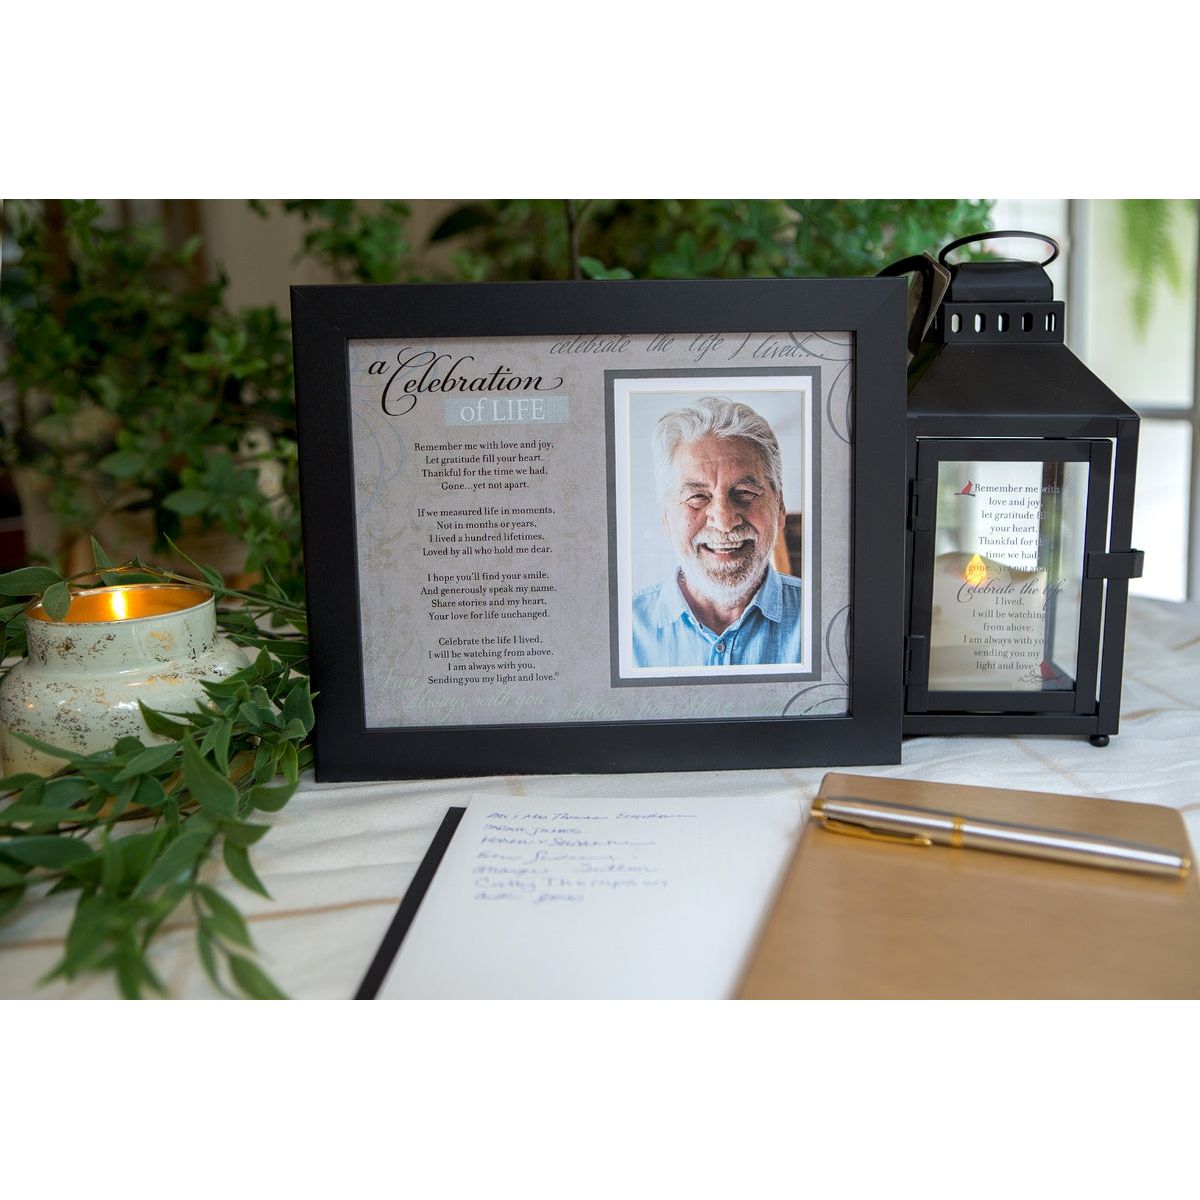 Celebration of Life frame and lantern featured at a celebration of life ceremony.